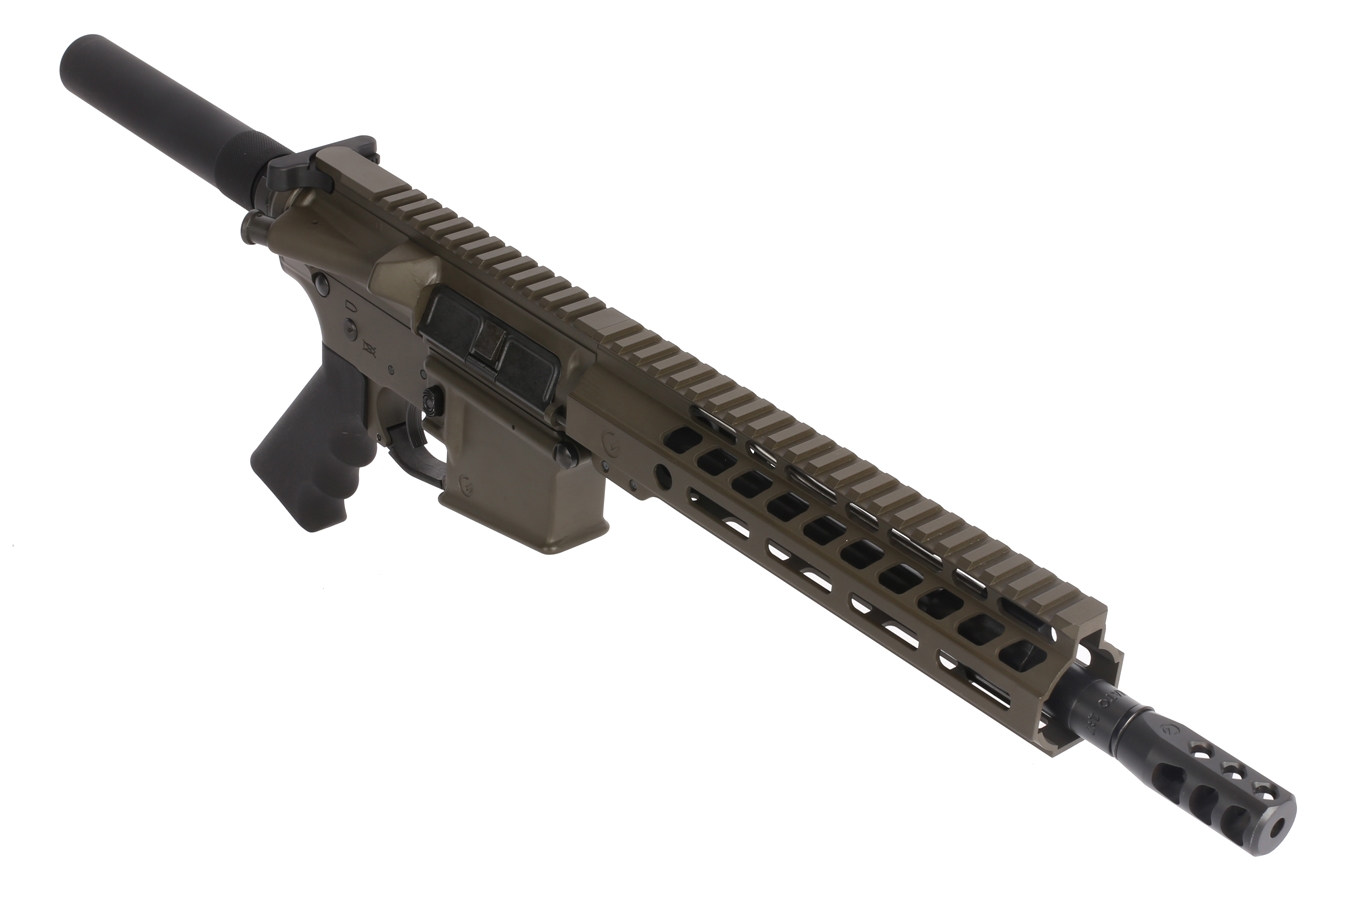 the ghost firearms ar 15 pistol has a 10 5 inch barrel and 9 inch m